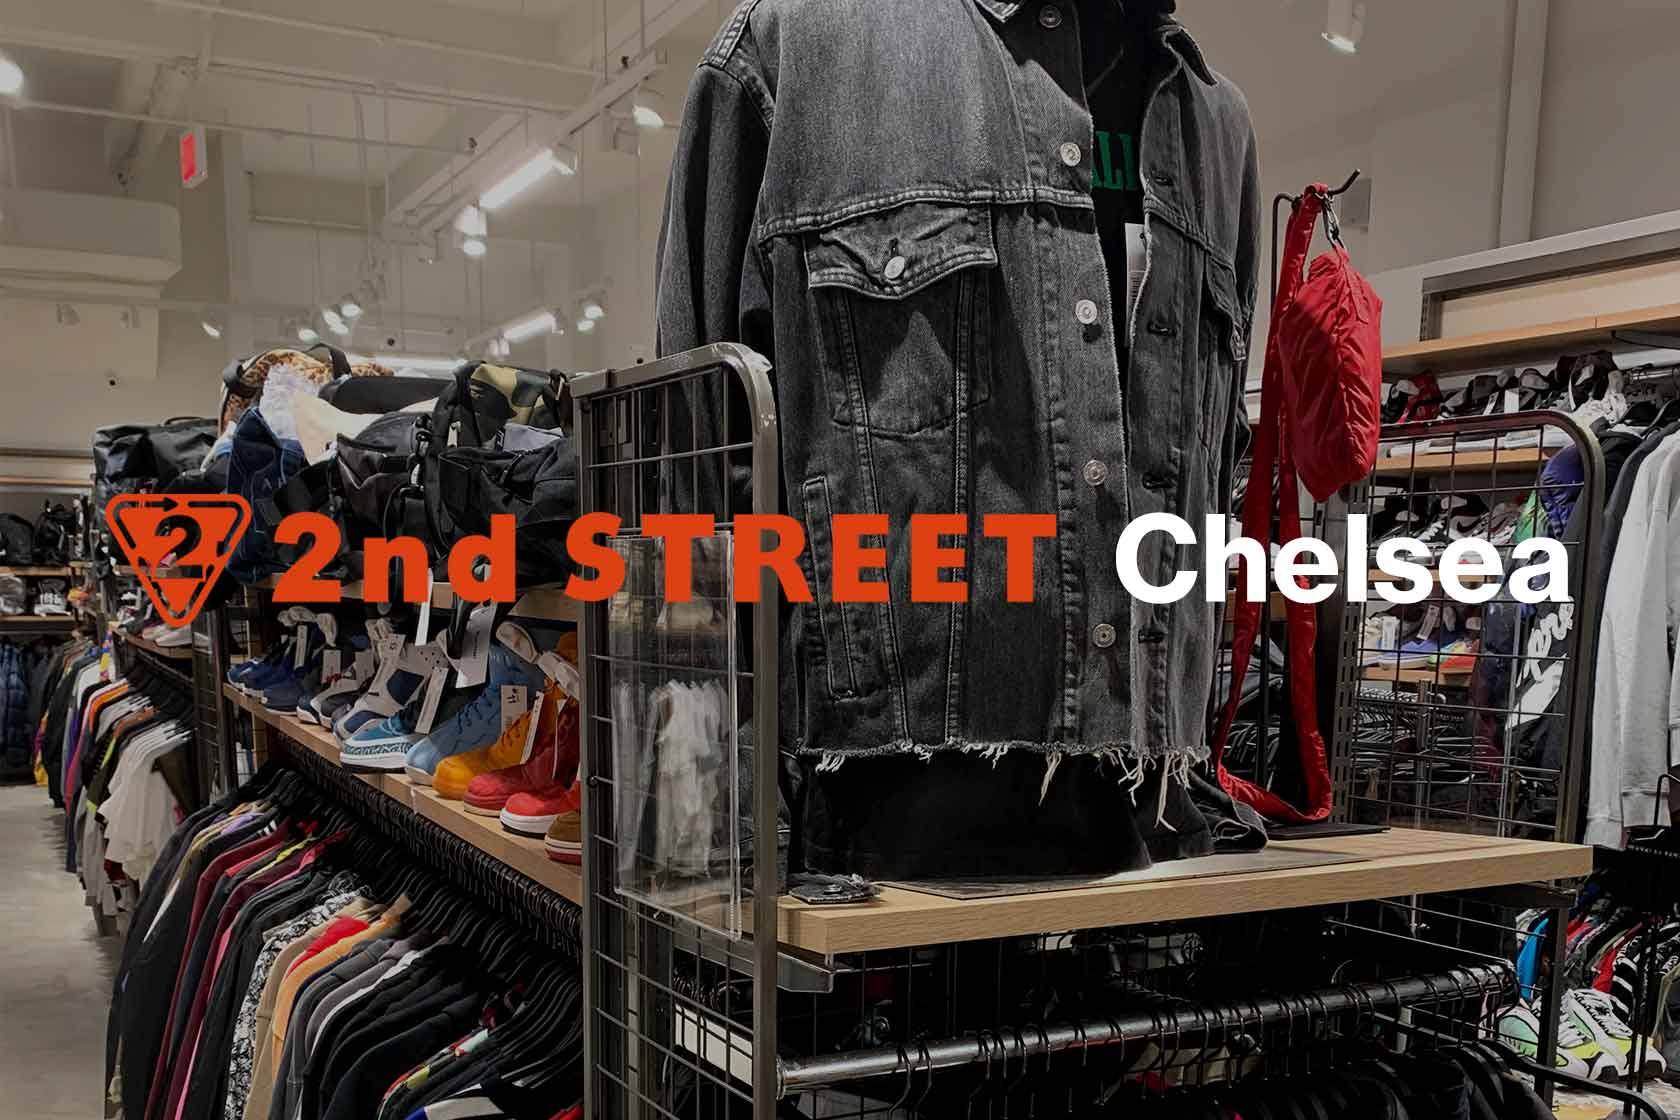 Support for Chelsea retailers